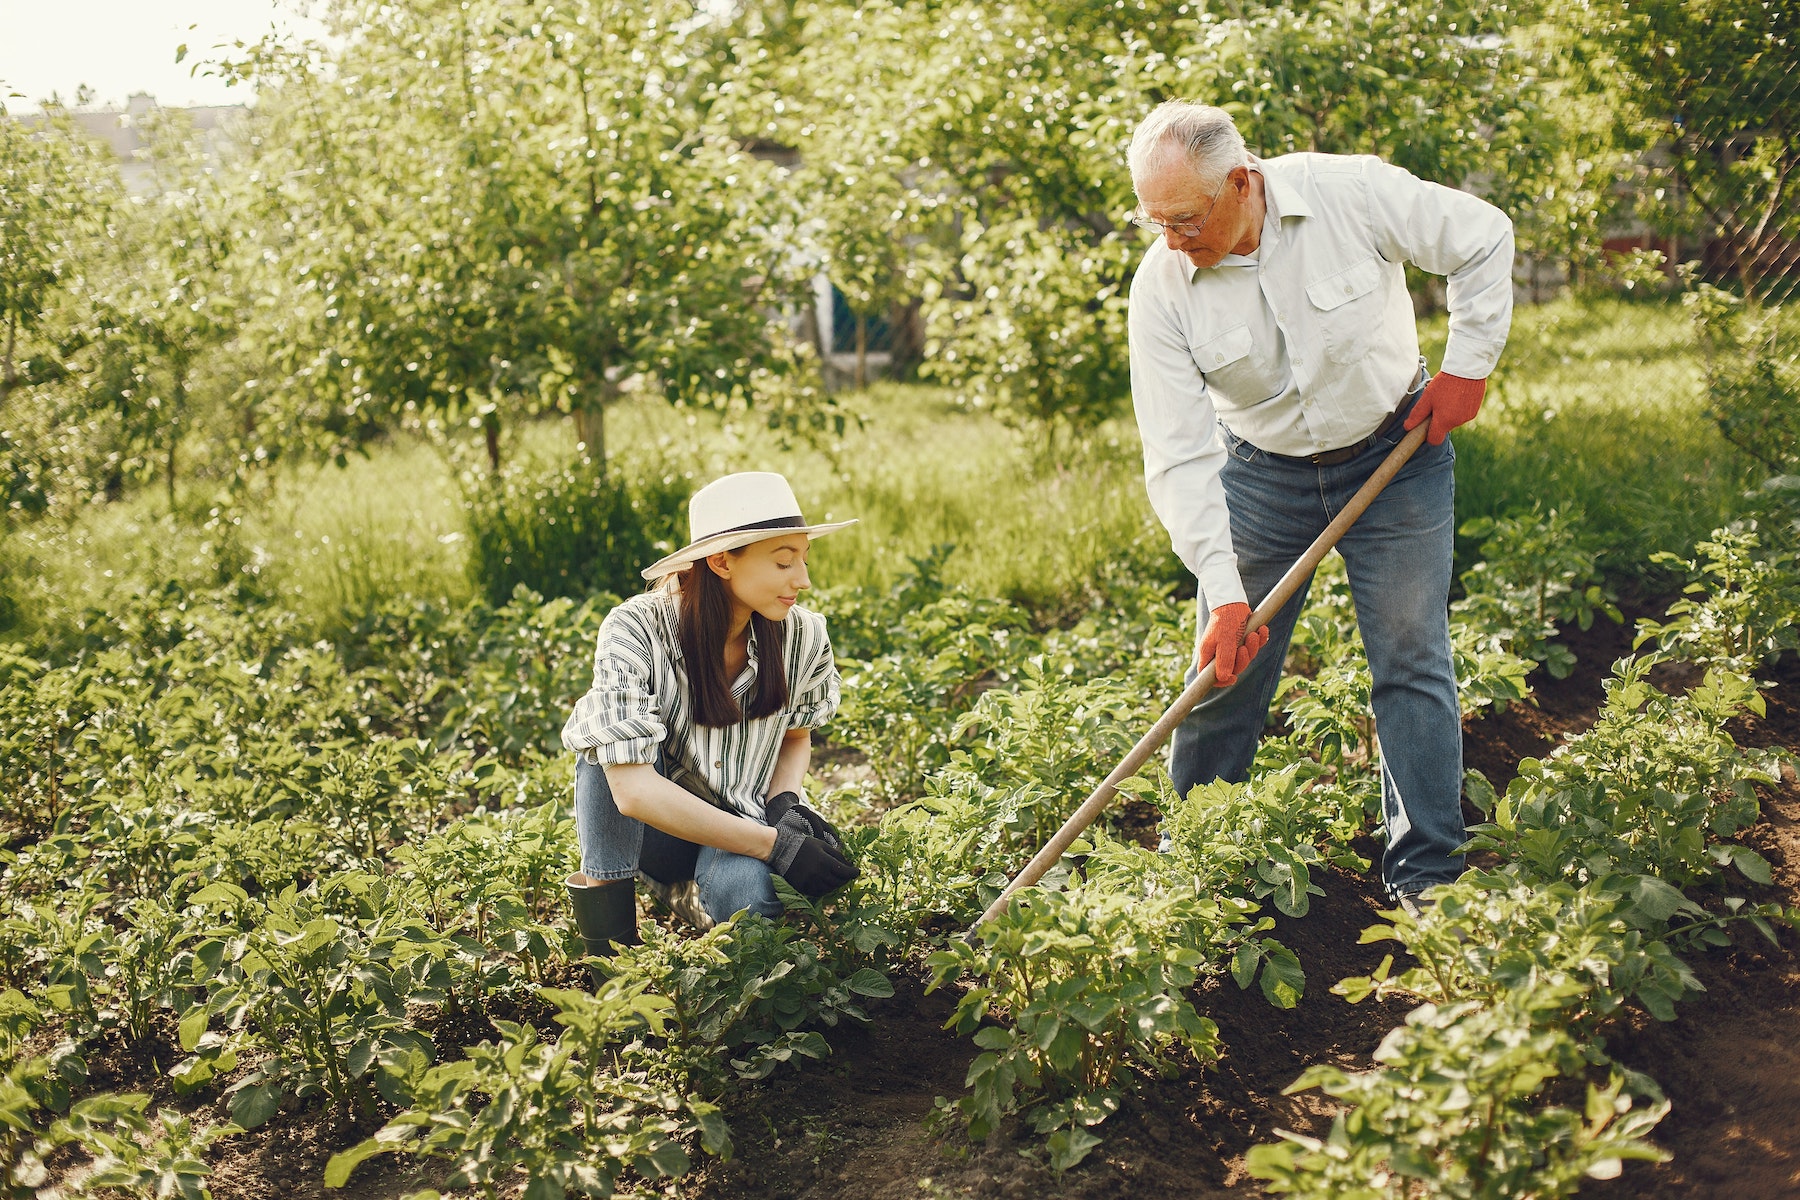 How gardening can improve your mental health during the pandemic 